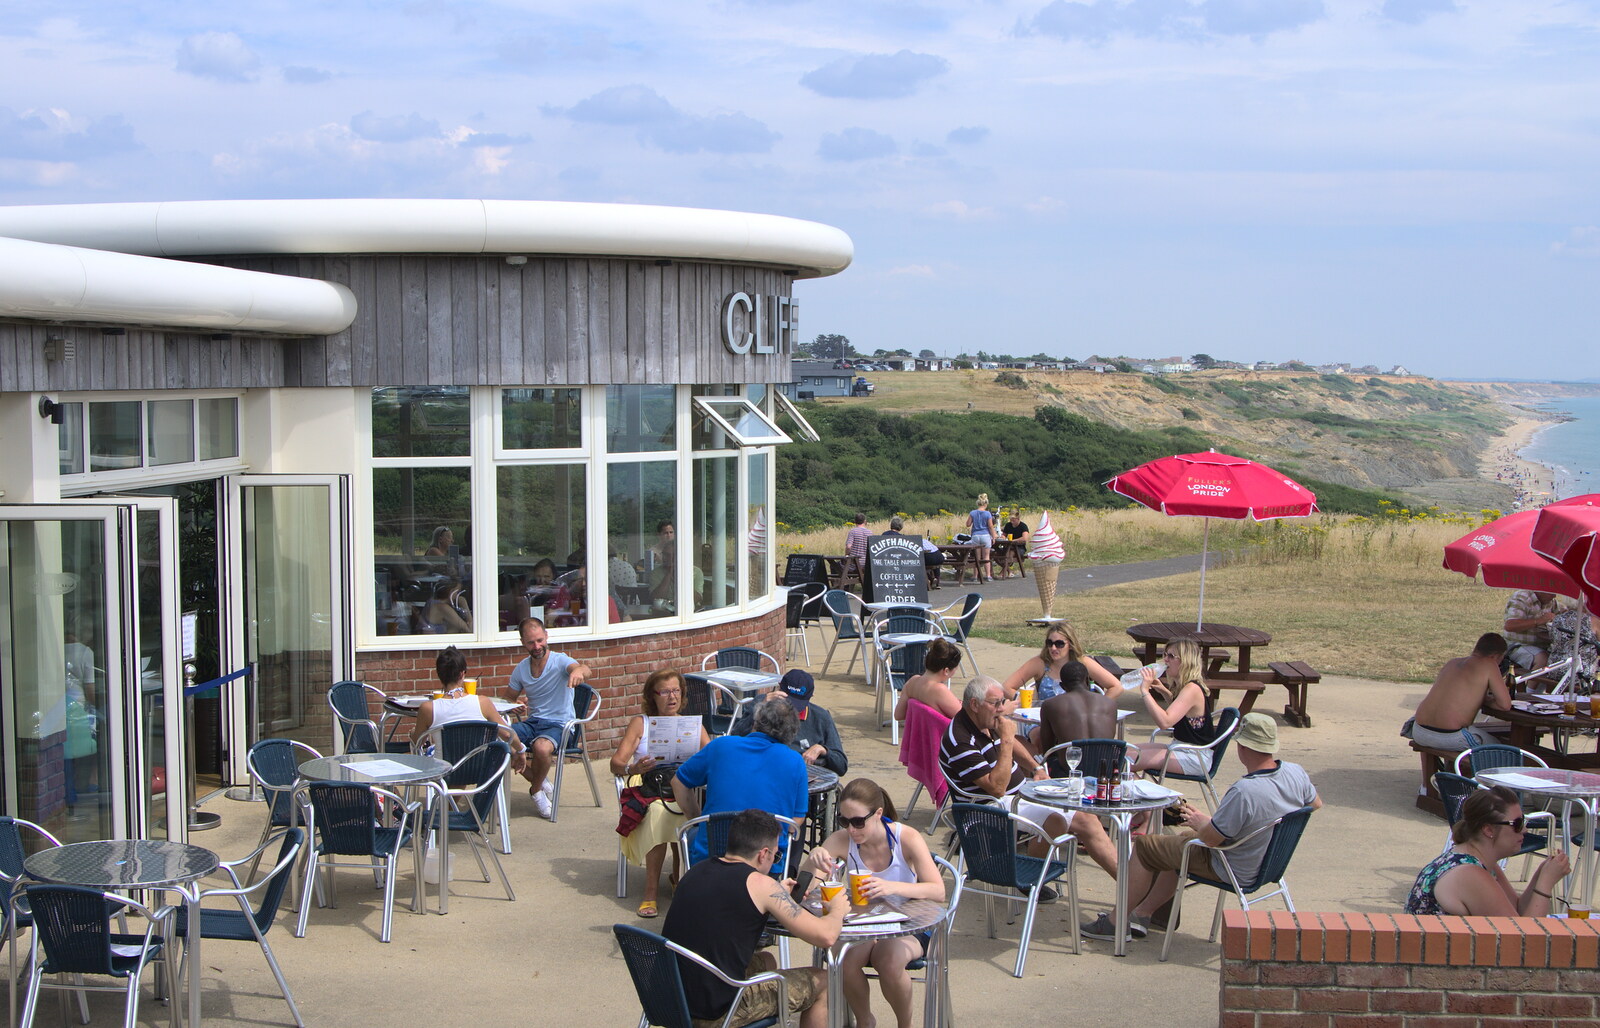 Cliffhanger Café from Bob and Bernice's 50th Wedding Anniversary, Hinton Admiral, Dorset - 25th July 2014